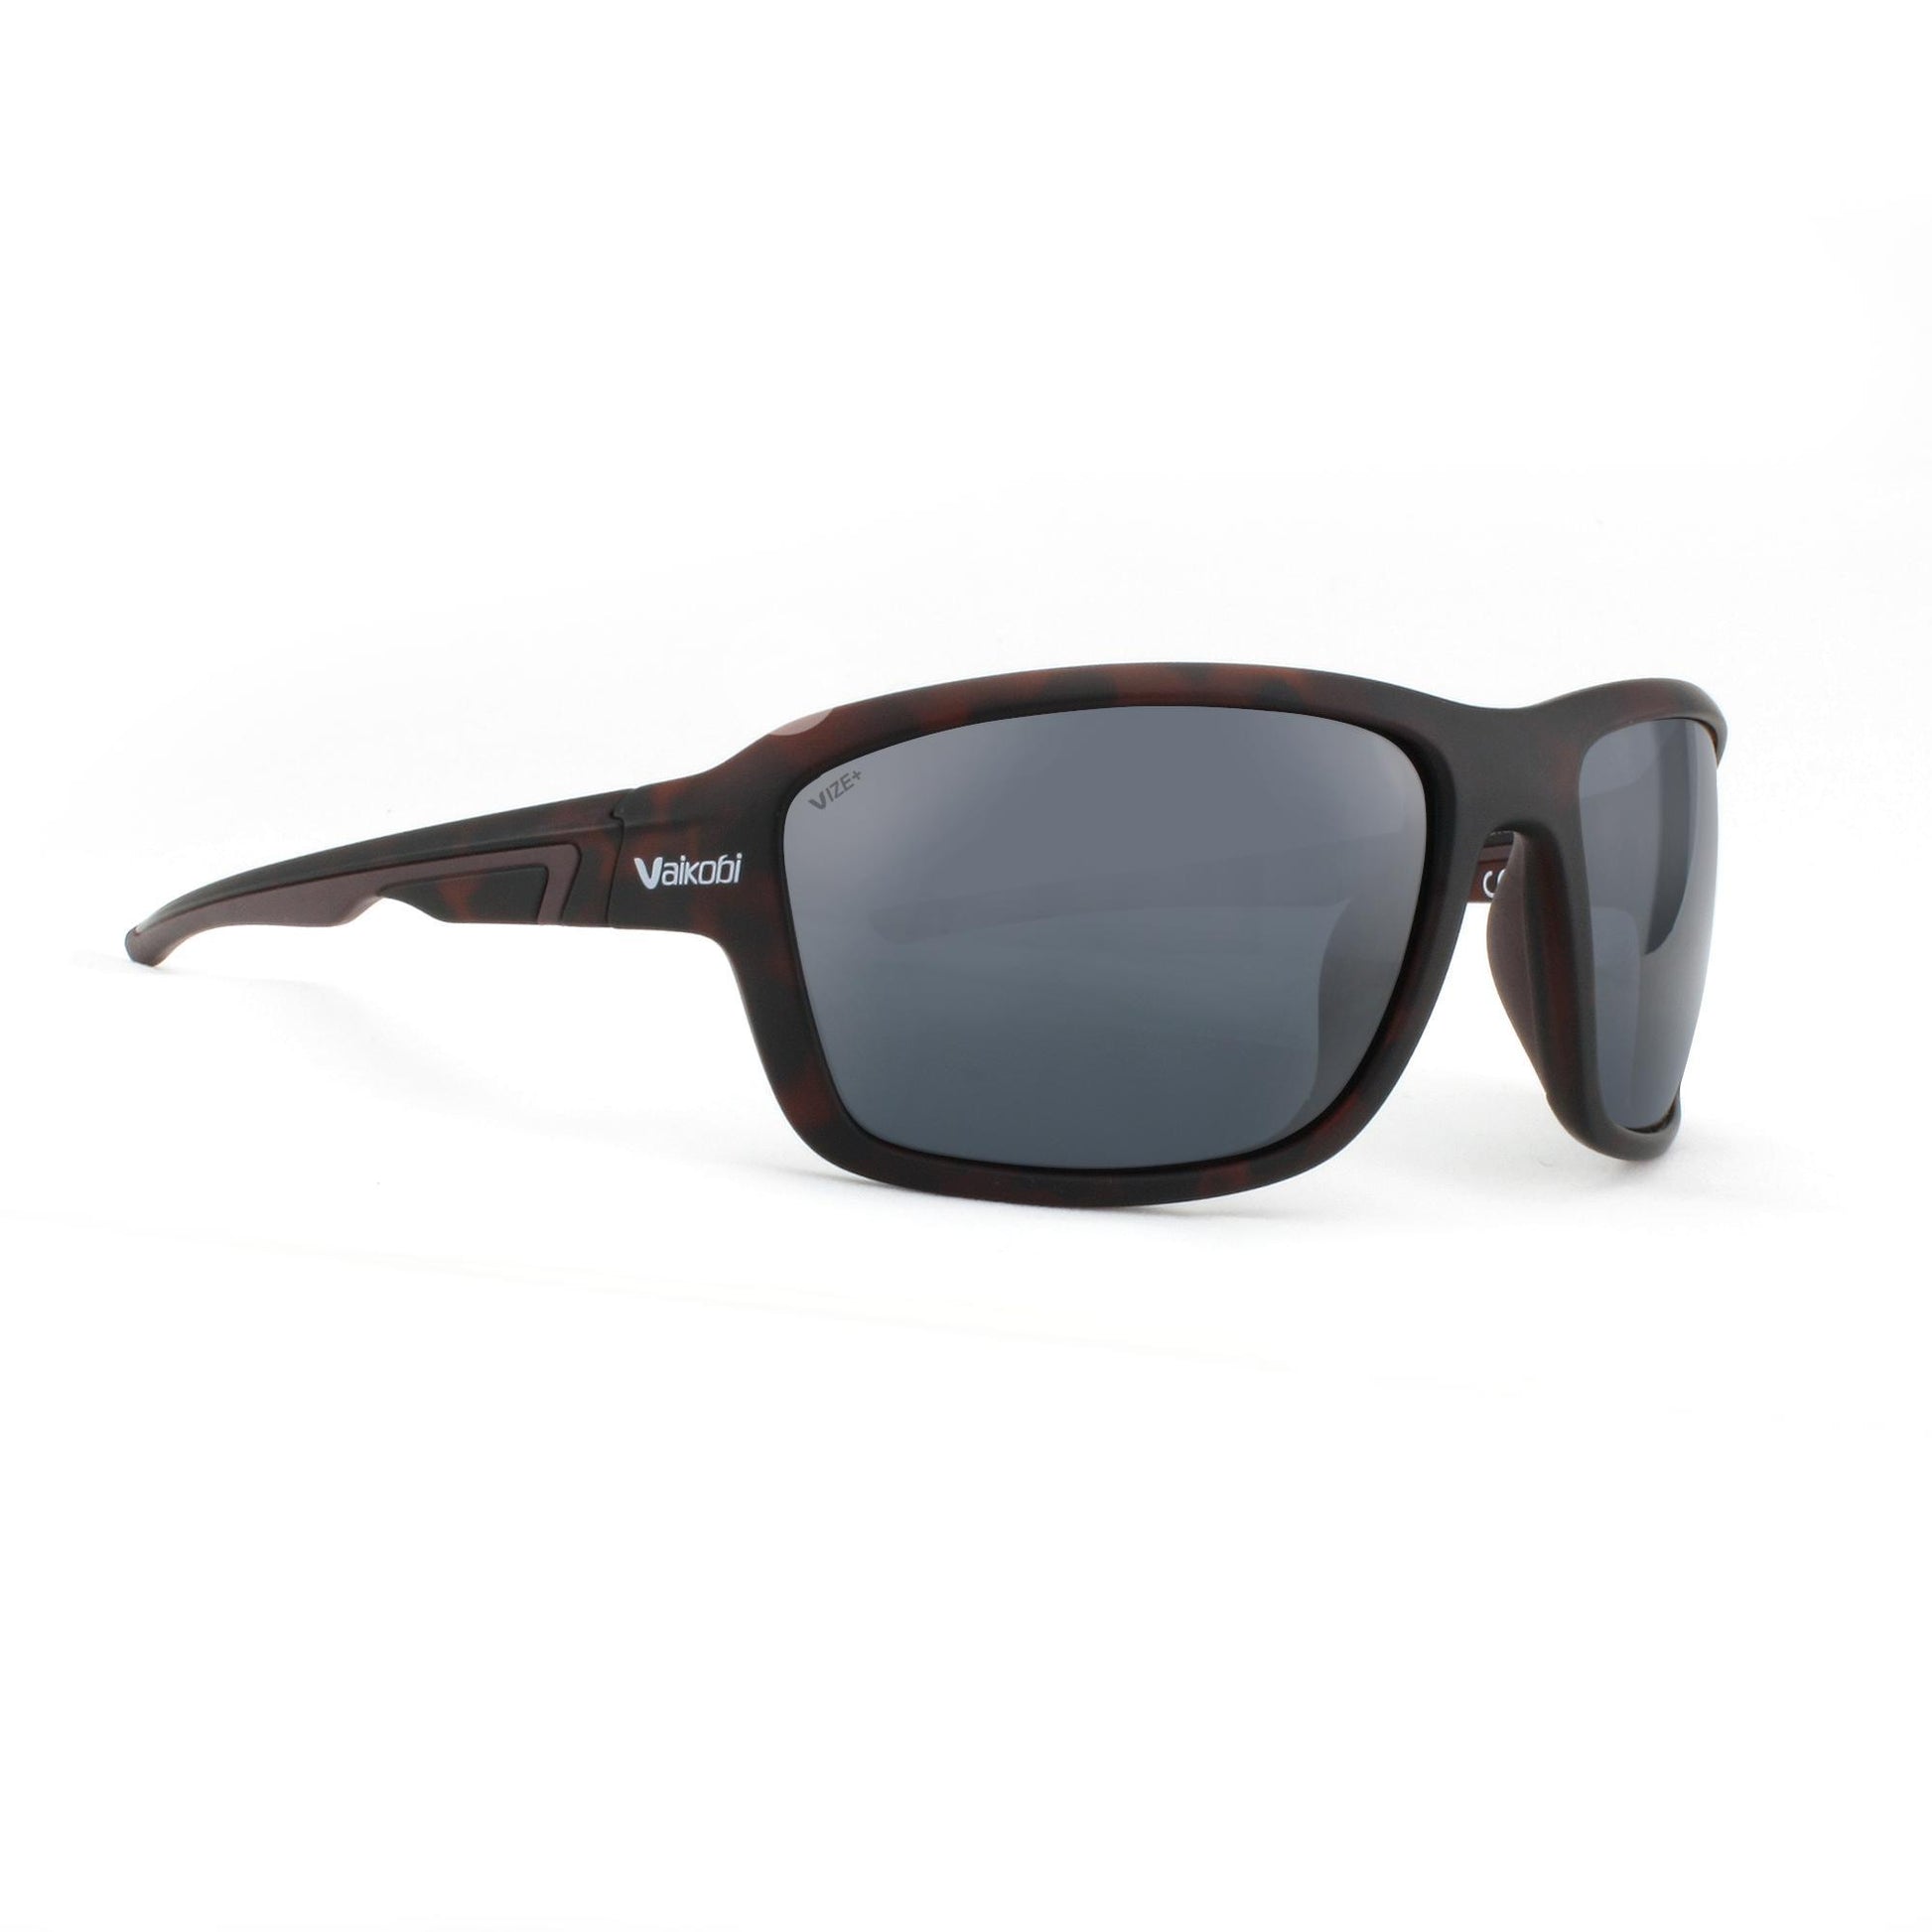 WILEY X WX Wave Sunglasses Gloss Black 64-18-125 –, 55% OFF